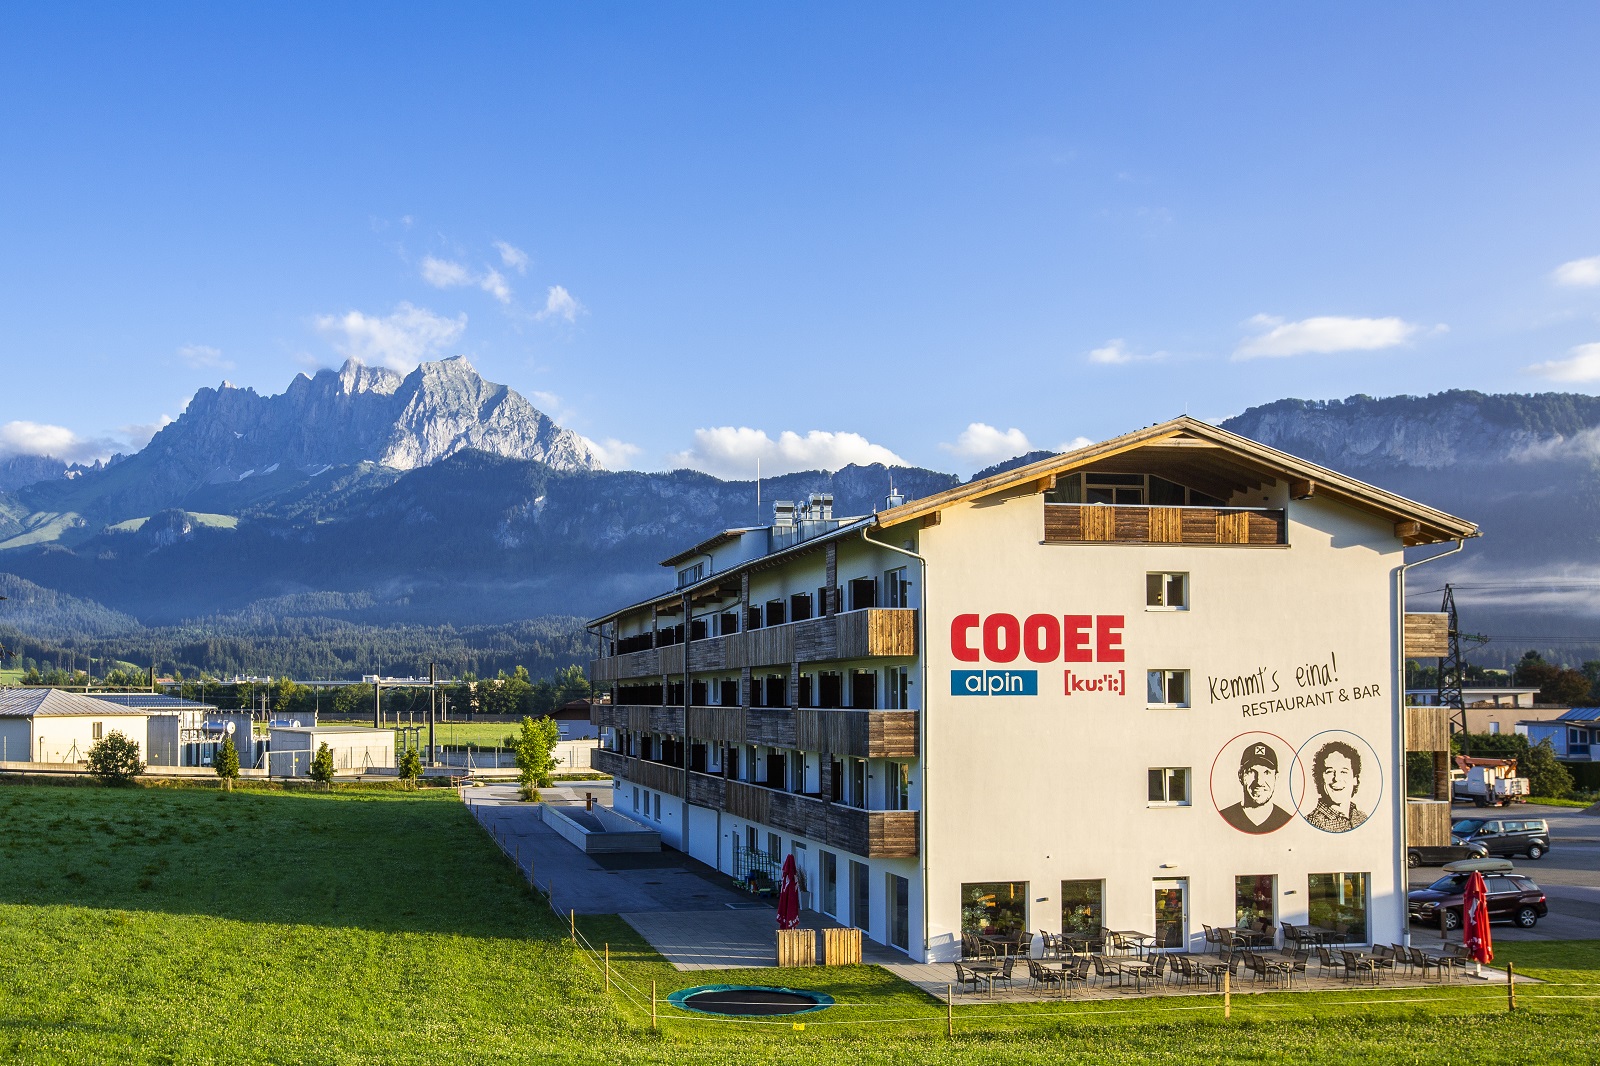 COOEE alpin Hotel Kitzbüheler Alpen <br/>83.93 ew <br/> <a href='http://vakantieoplossing.nl/outpage/?id=8b0e8783b503350c85bb0963d4c7a55b' target='_blank'>View Details</a>